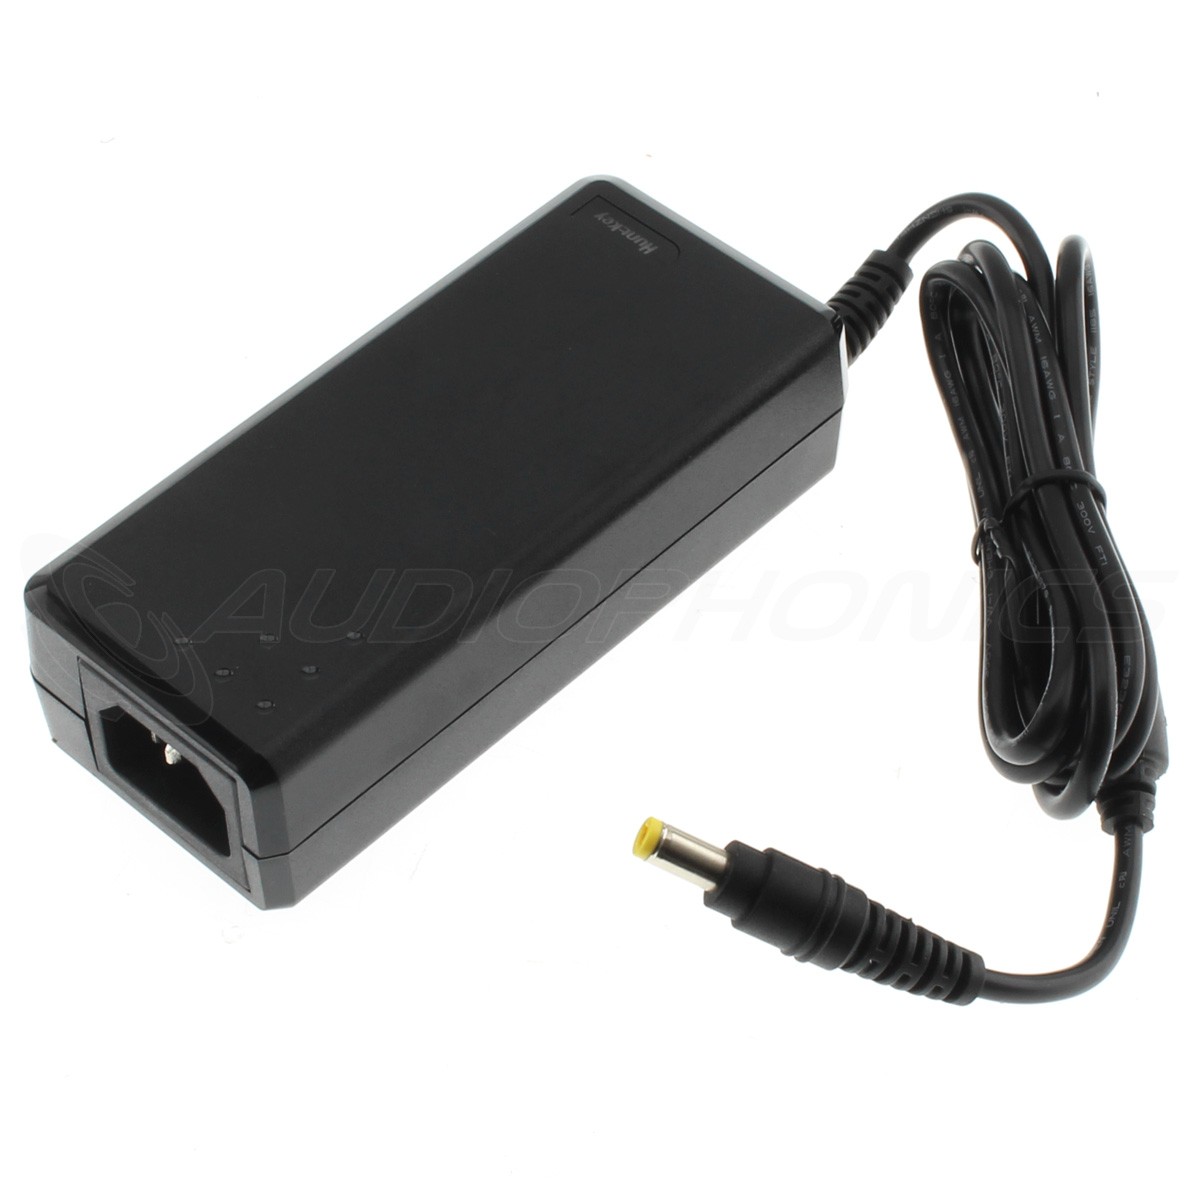 AC/DC Switching Power Adapter 100-240V AC to 12V 5A DC - Audiophonics